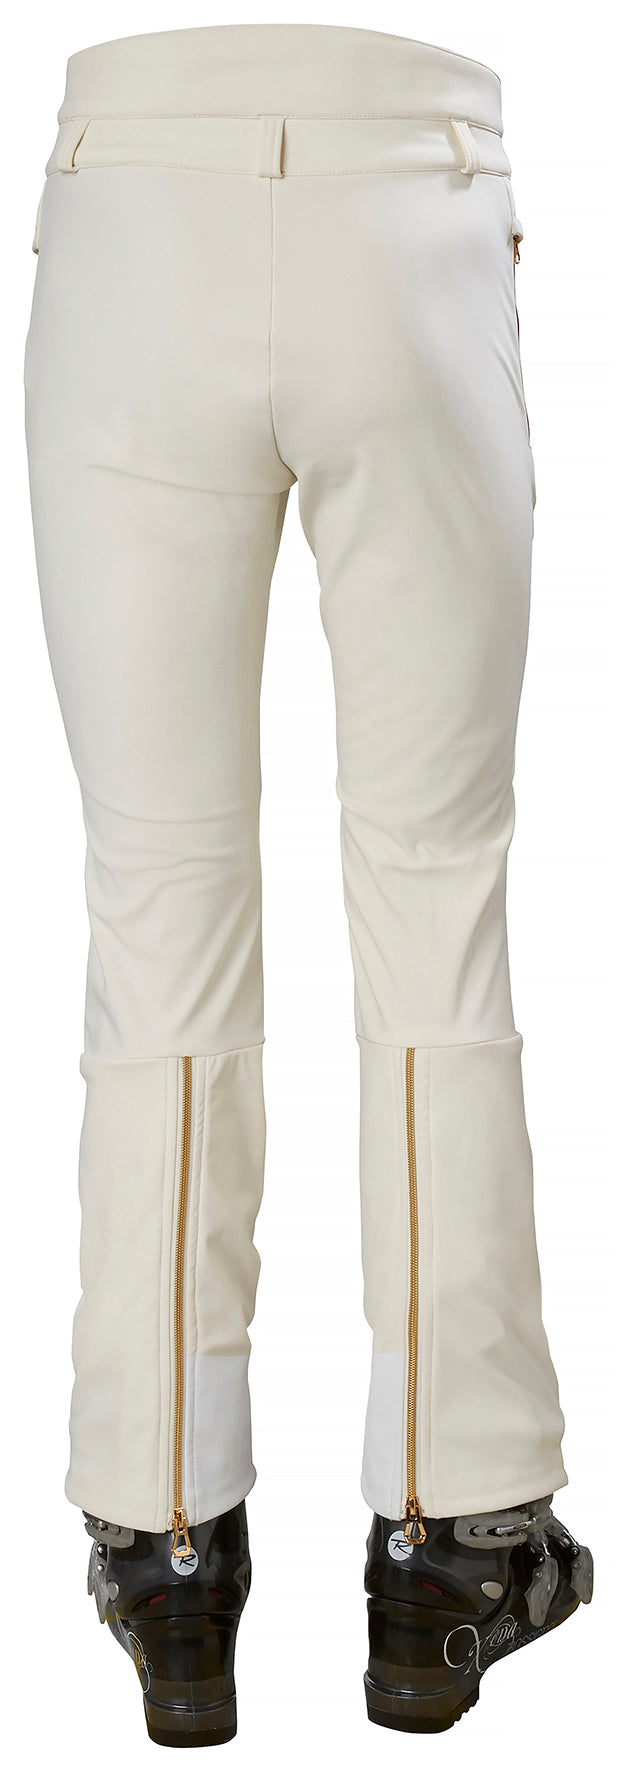 W AVANTI STRETCH PANT, 048 Snow: Embrace the Elements with Helly